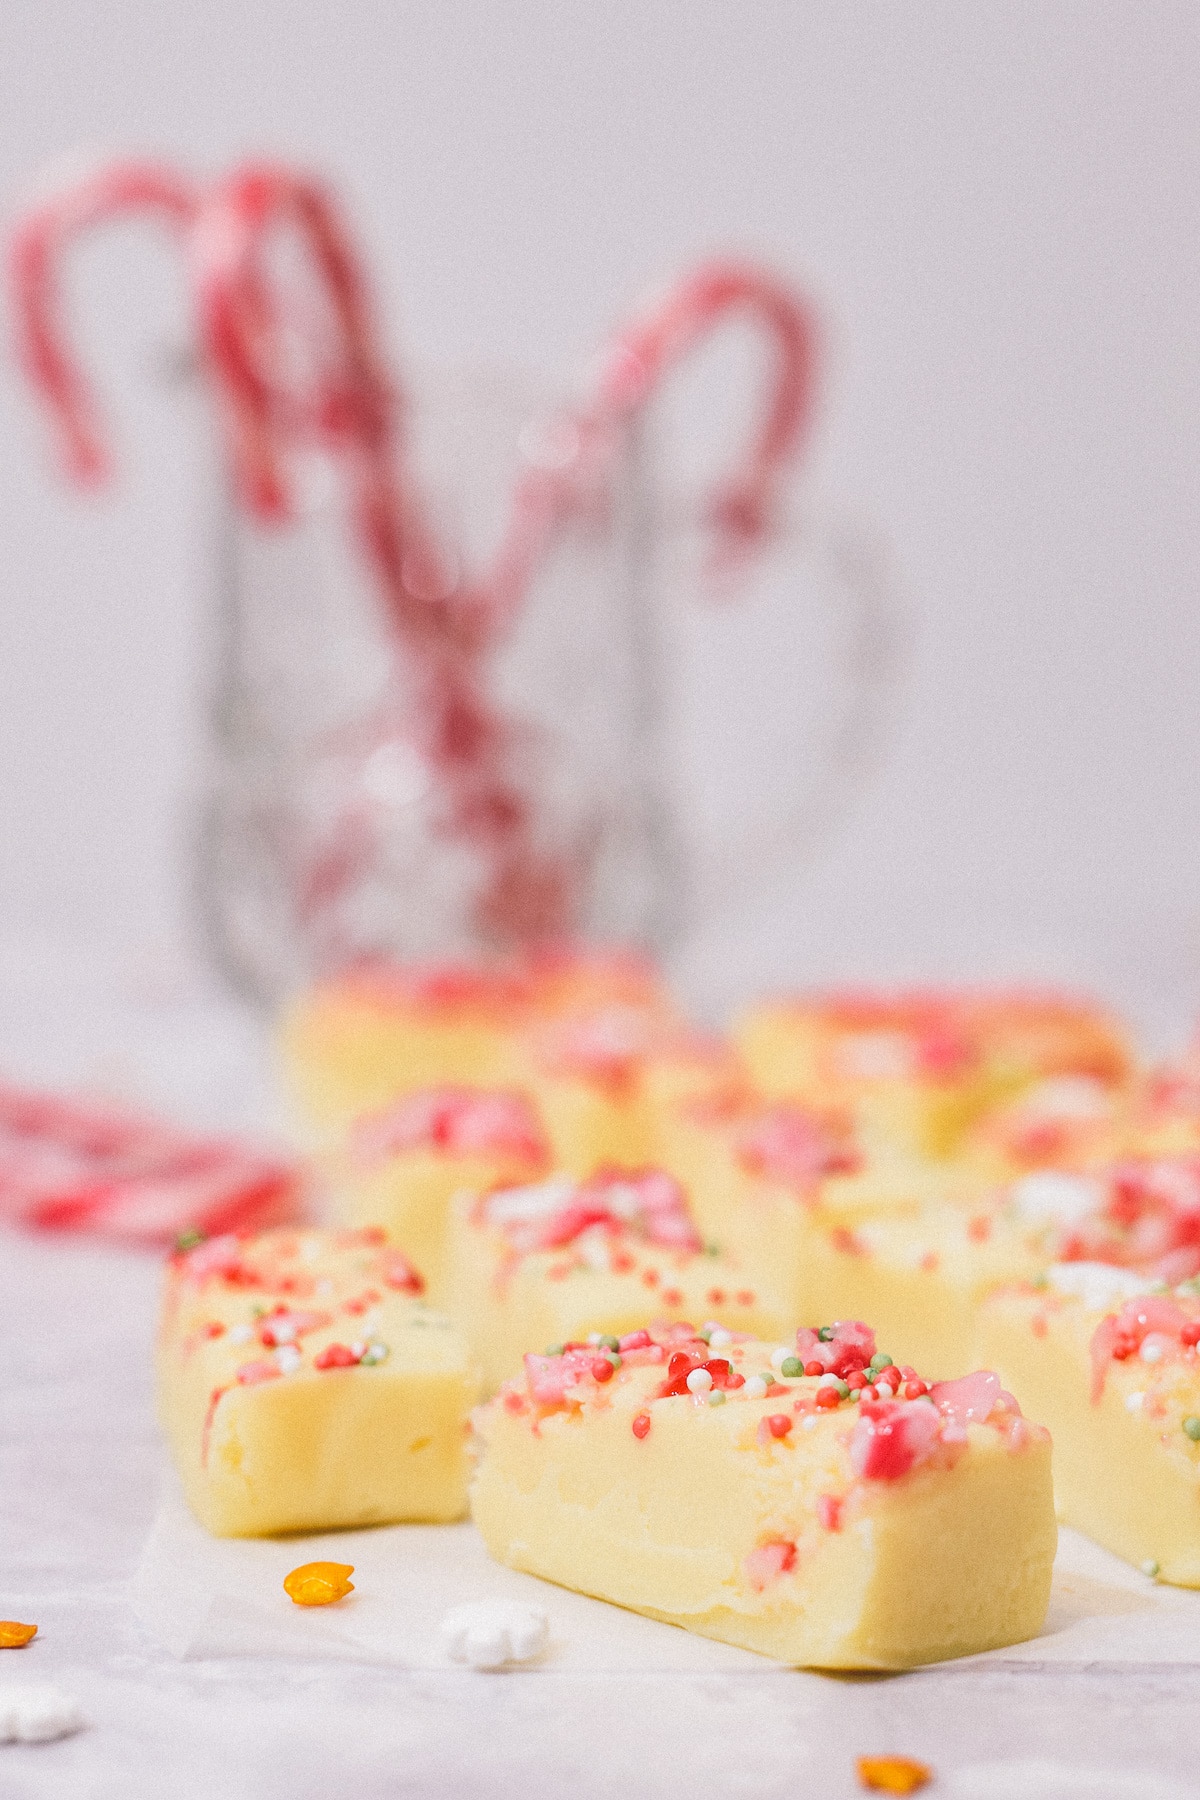 White Chocolate Peppermint Christmas fudge pieces with candy canes in jar behind